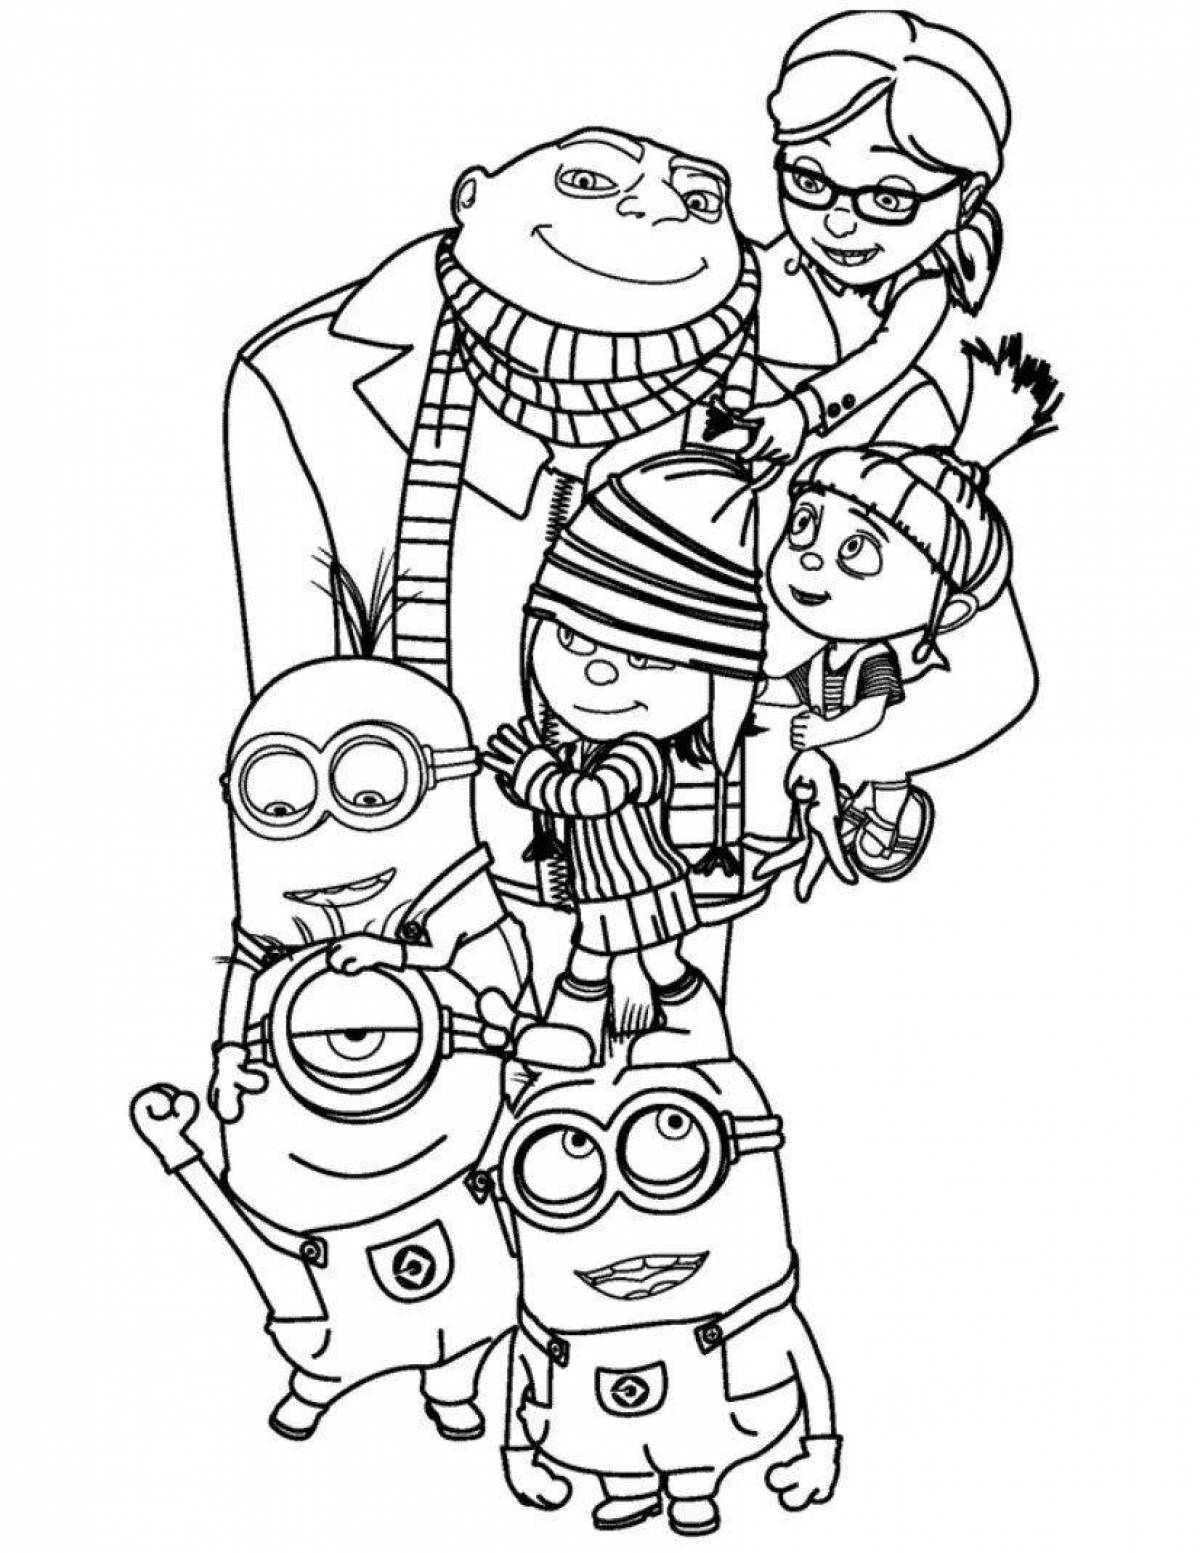 Sweet despicable me 2 coloring book